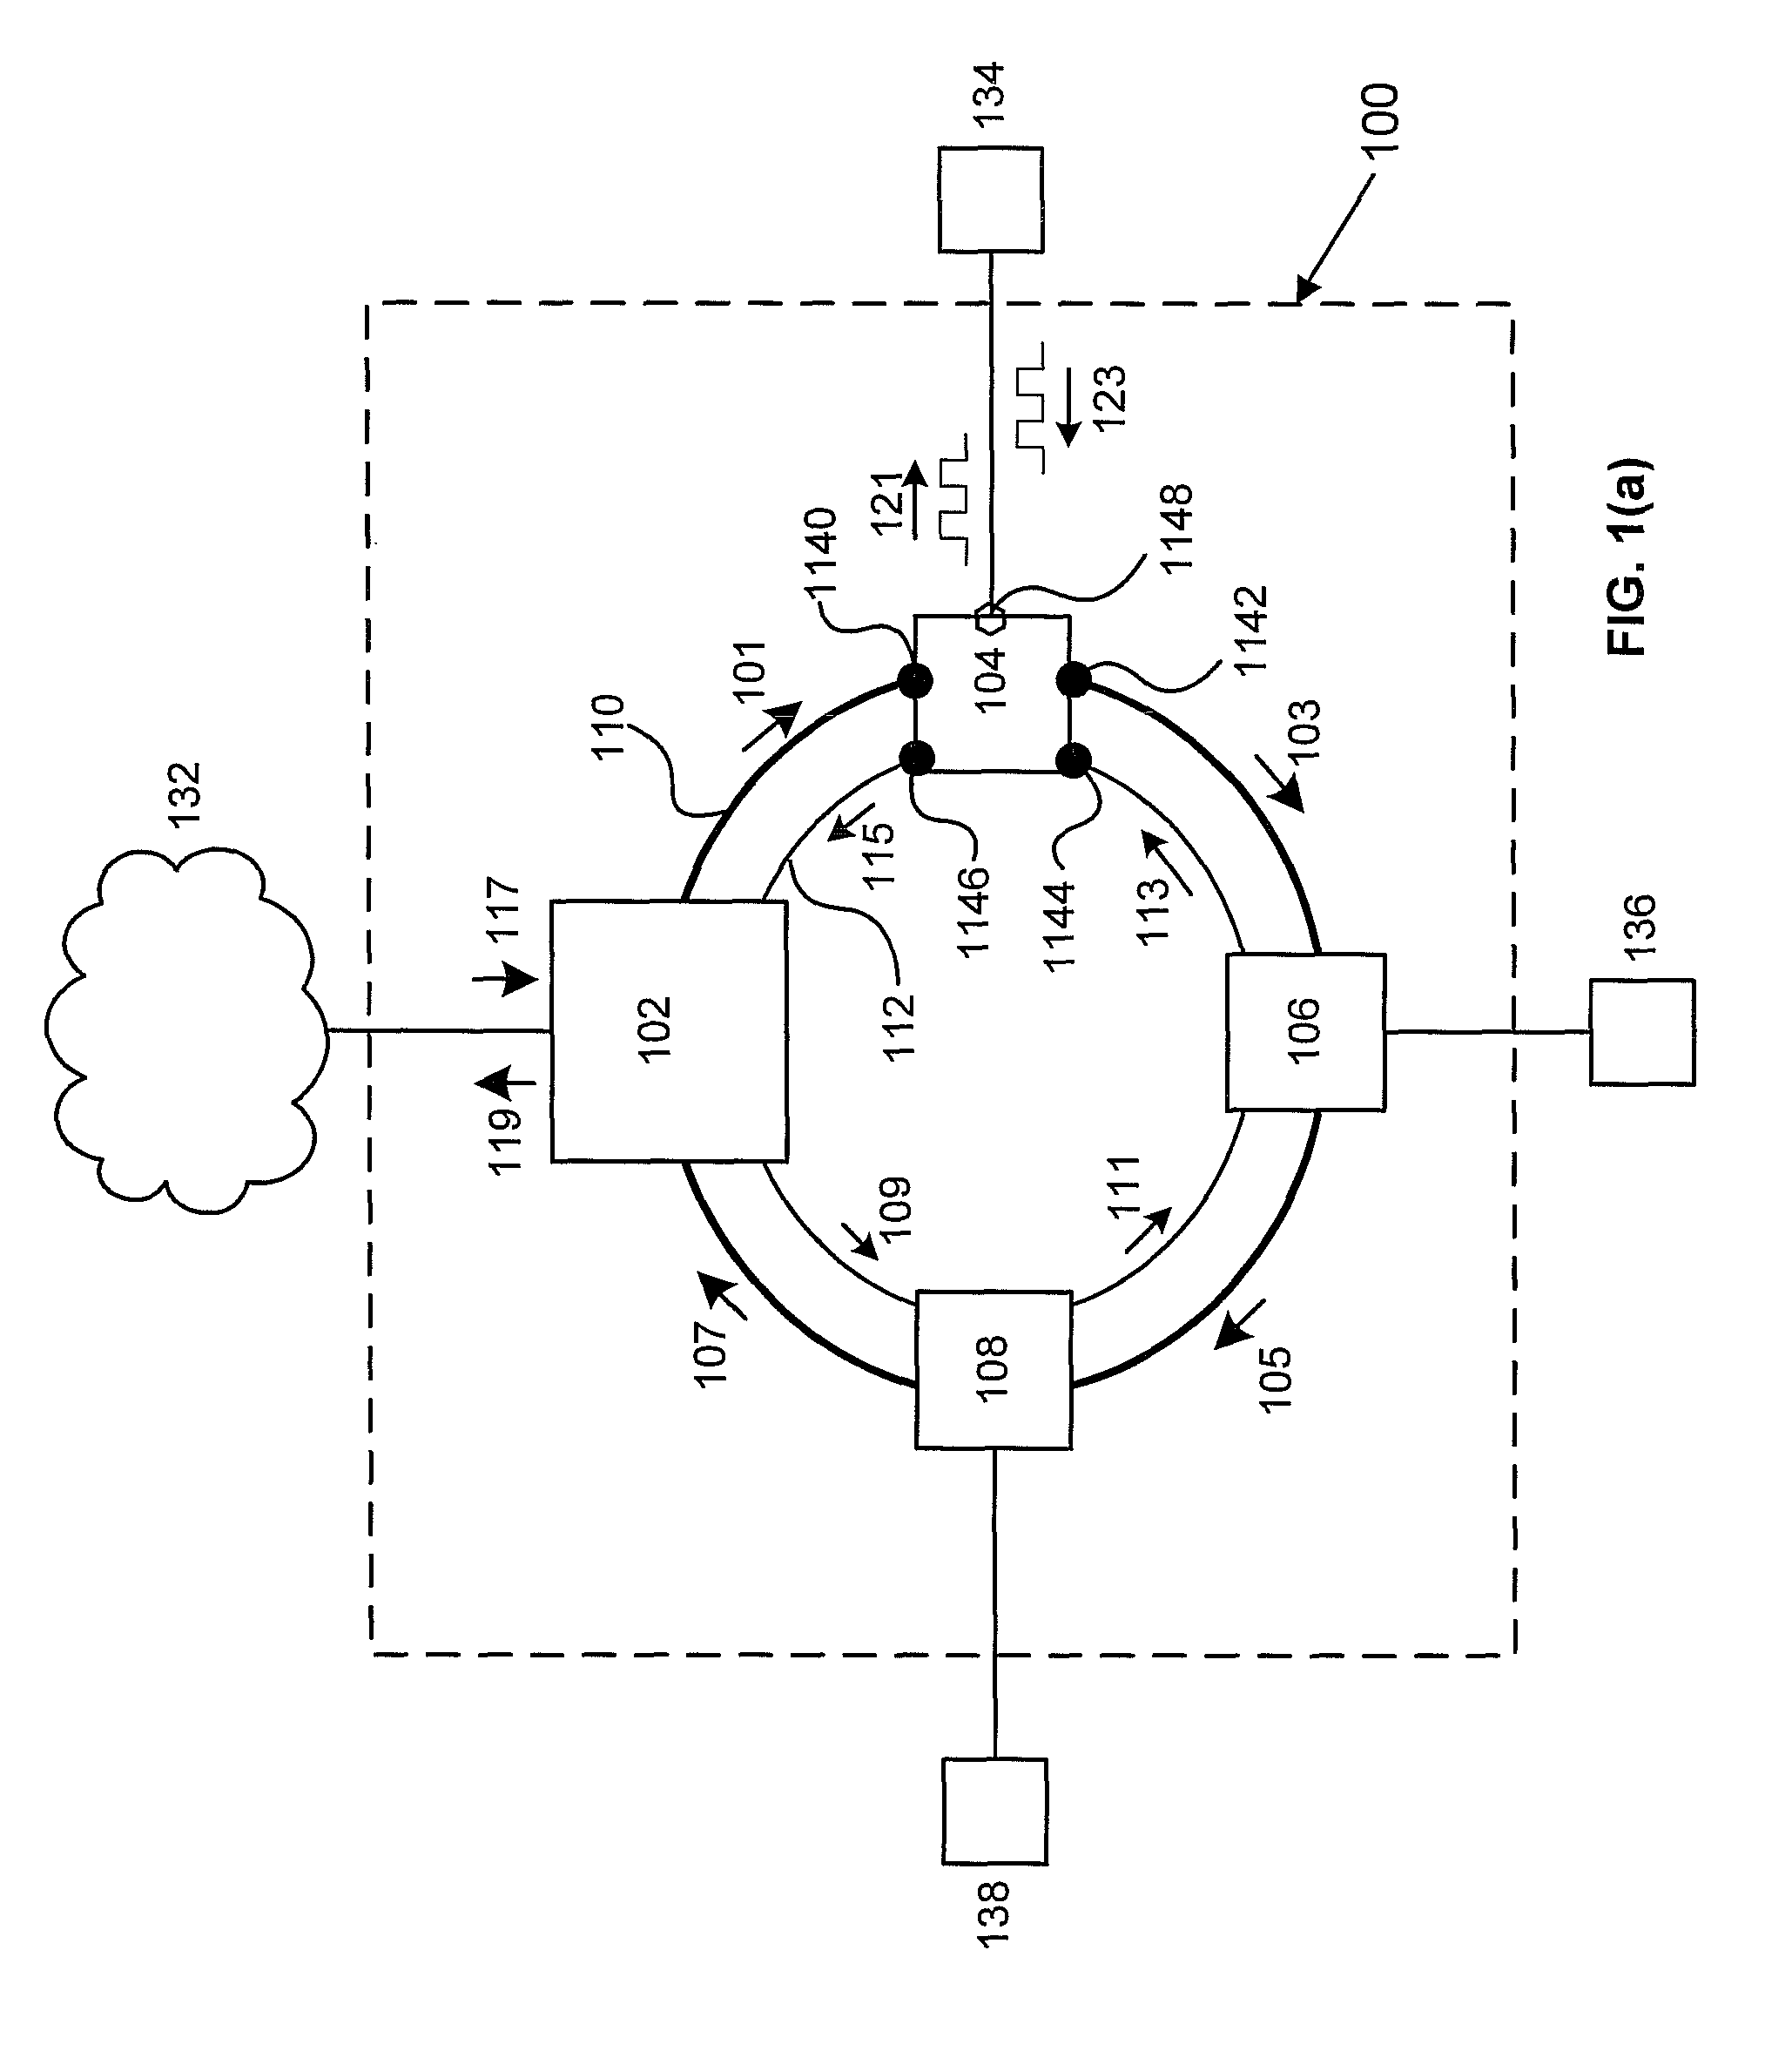 Orthogonal frequency division multiple access based optical ring network